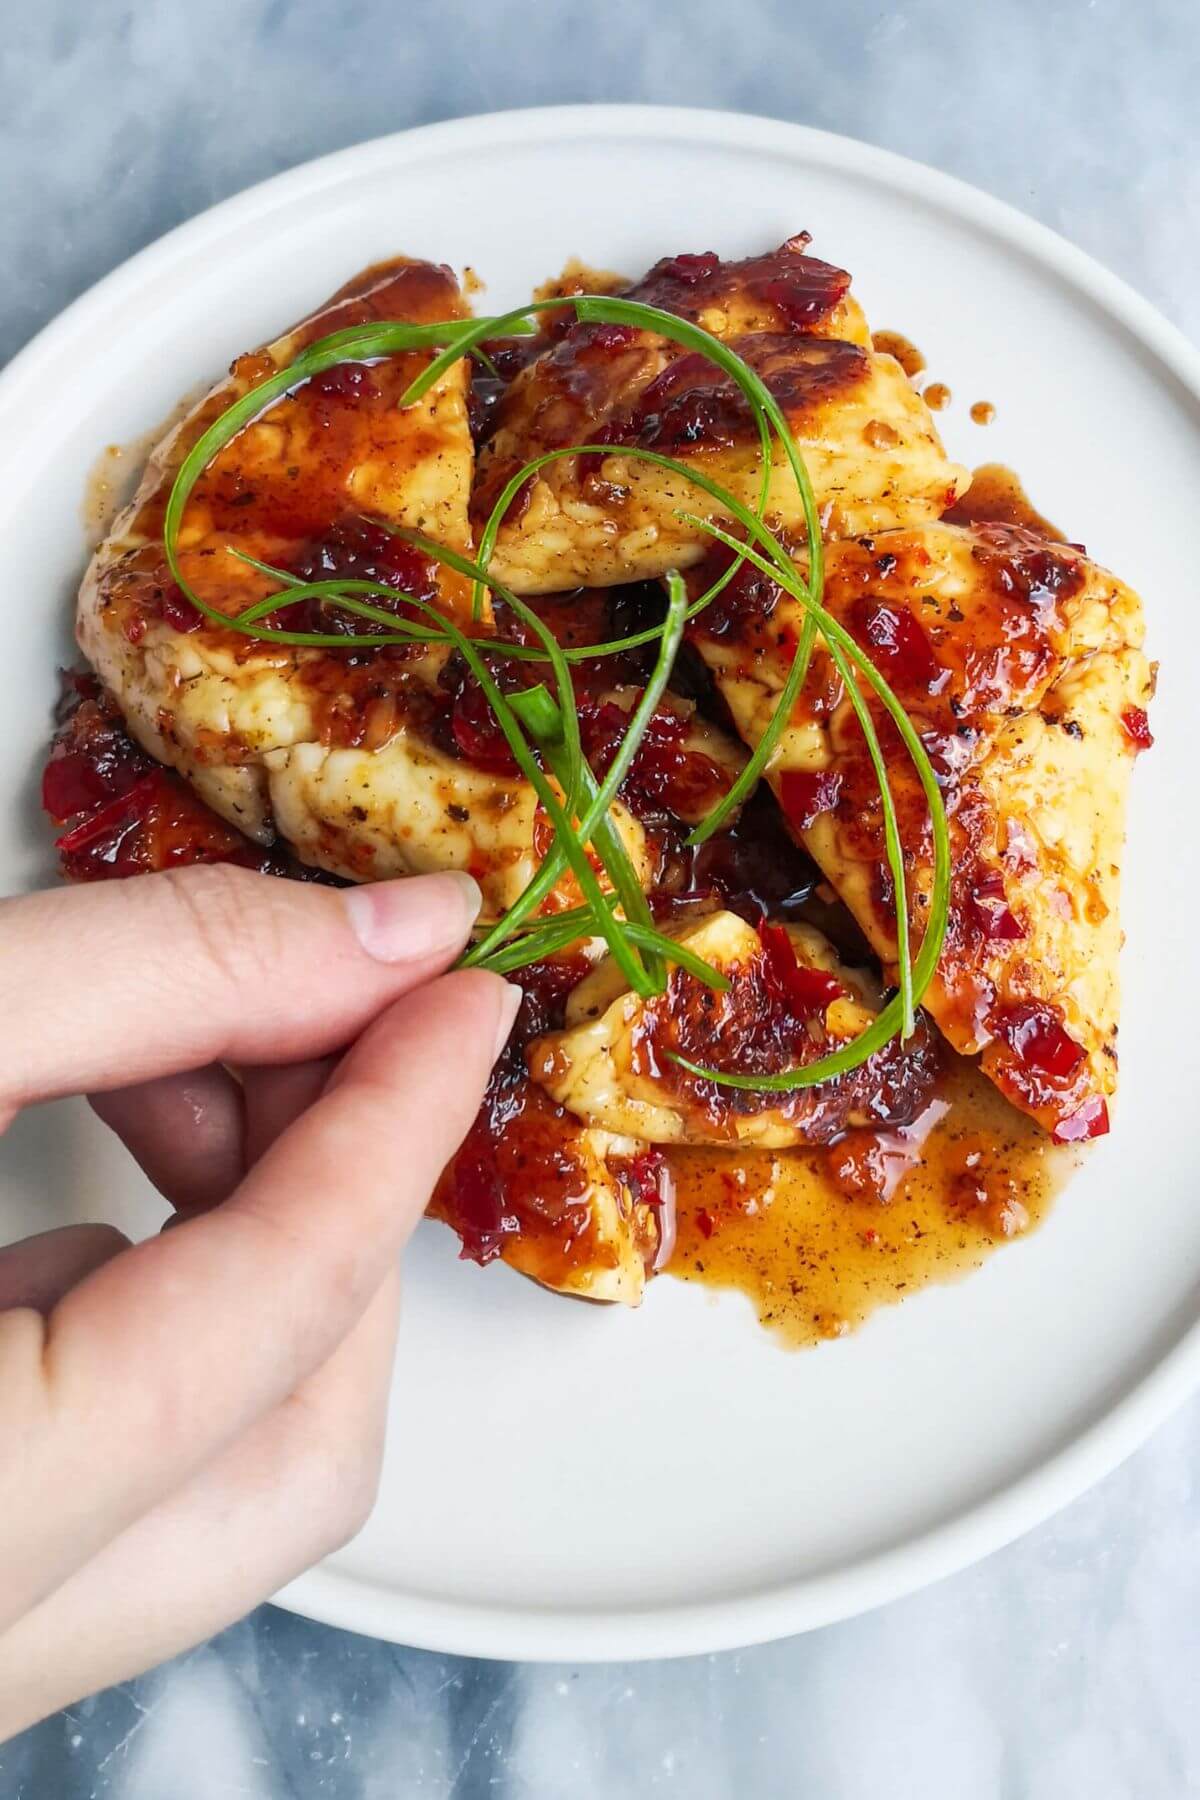 A hand adding curly spring onion to the top of the plate of sweet chilli halloumi.